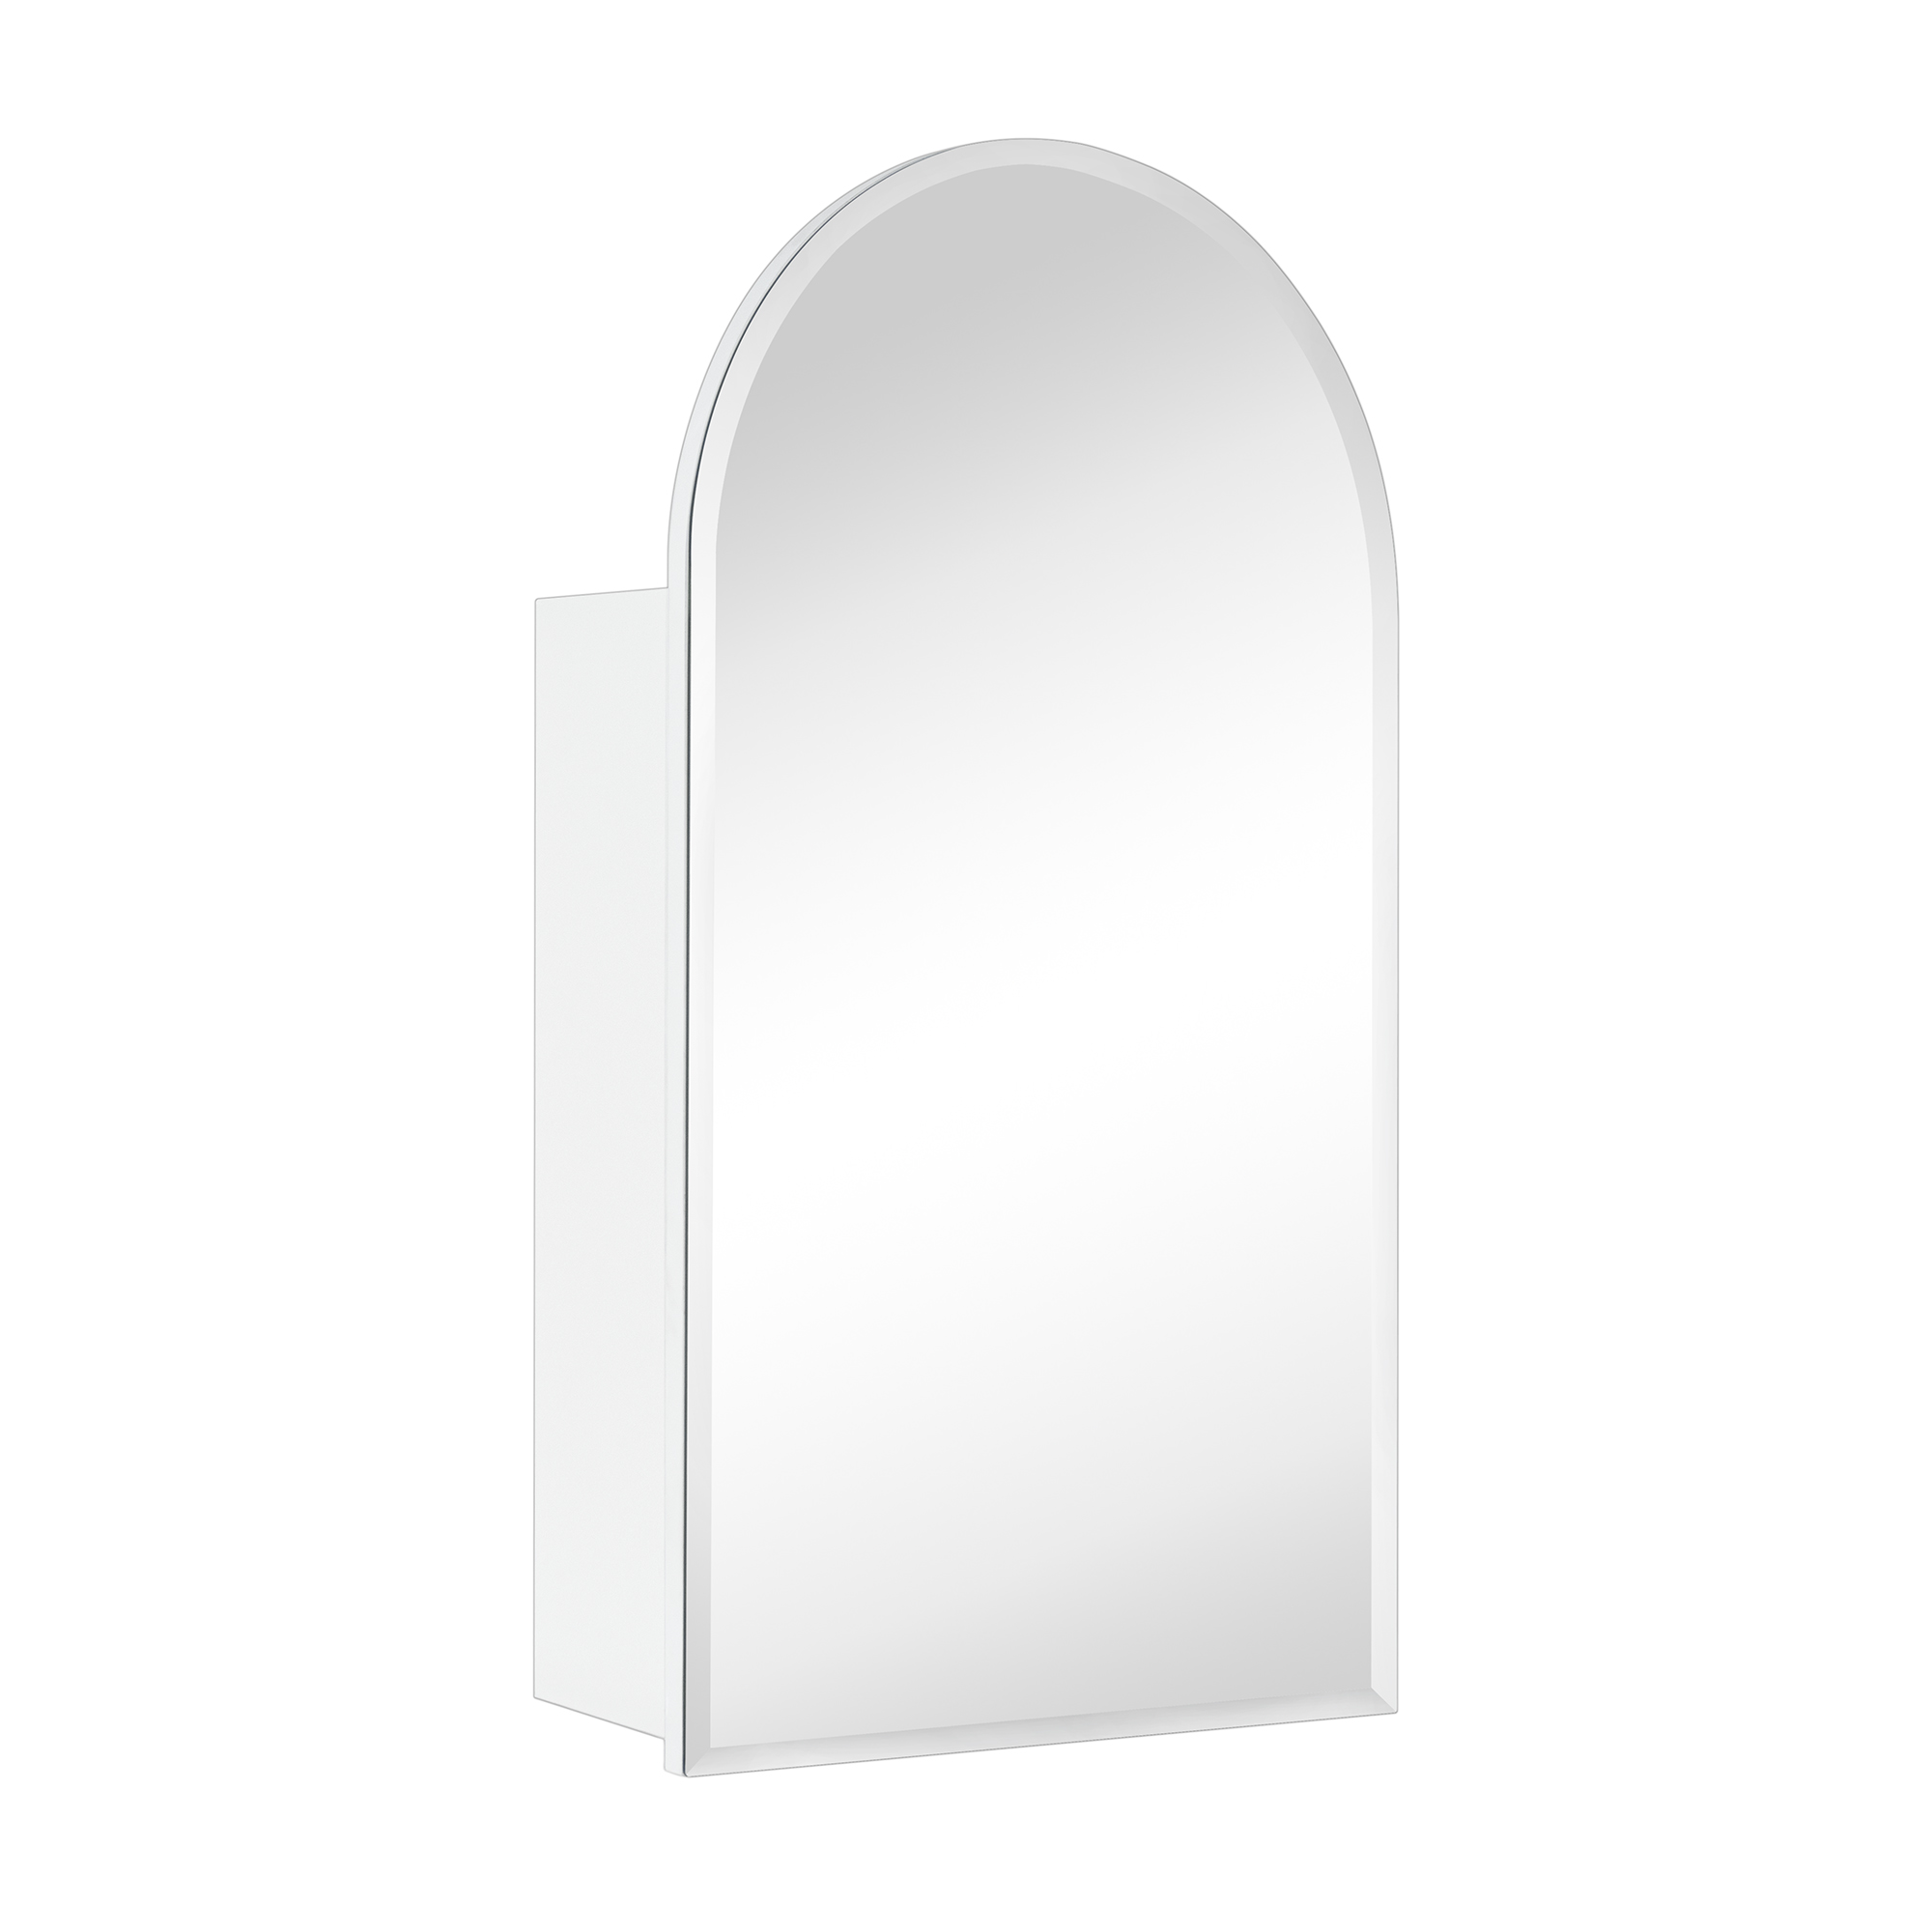 TOMACE White Frameless Arch Medicine Cabinet with Mirror Recess & Surface Mount Cabinet with Mirror for Bathroom, 28'' H x 16'' W